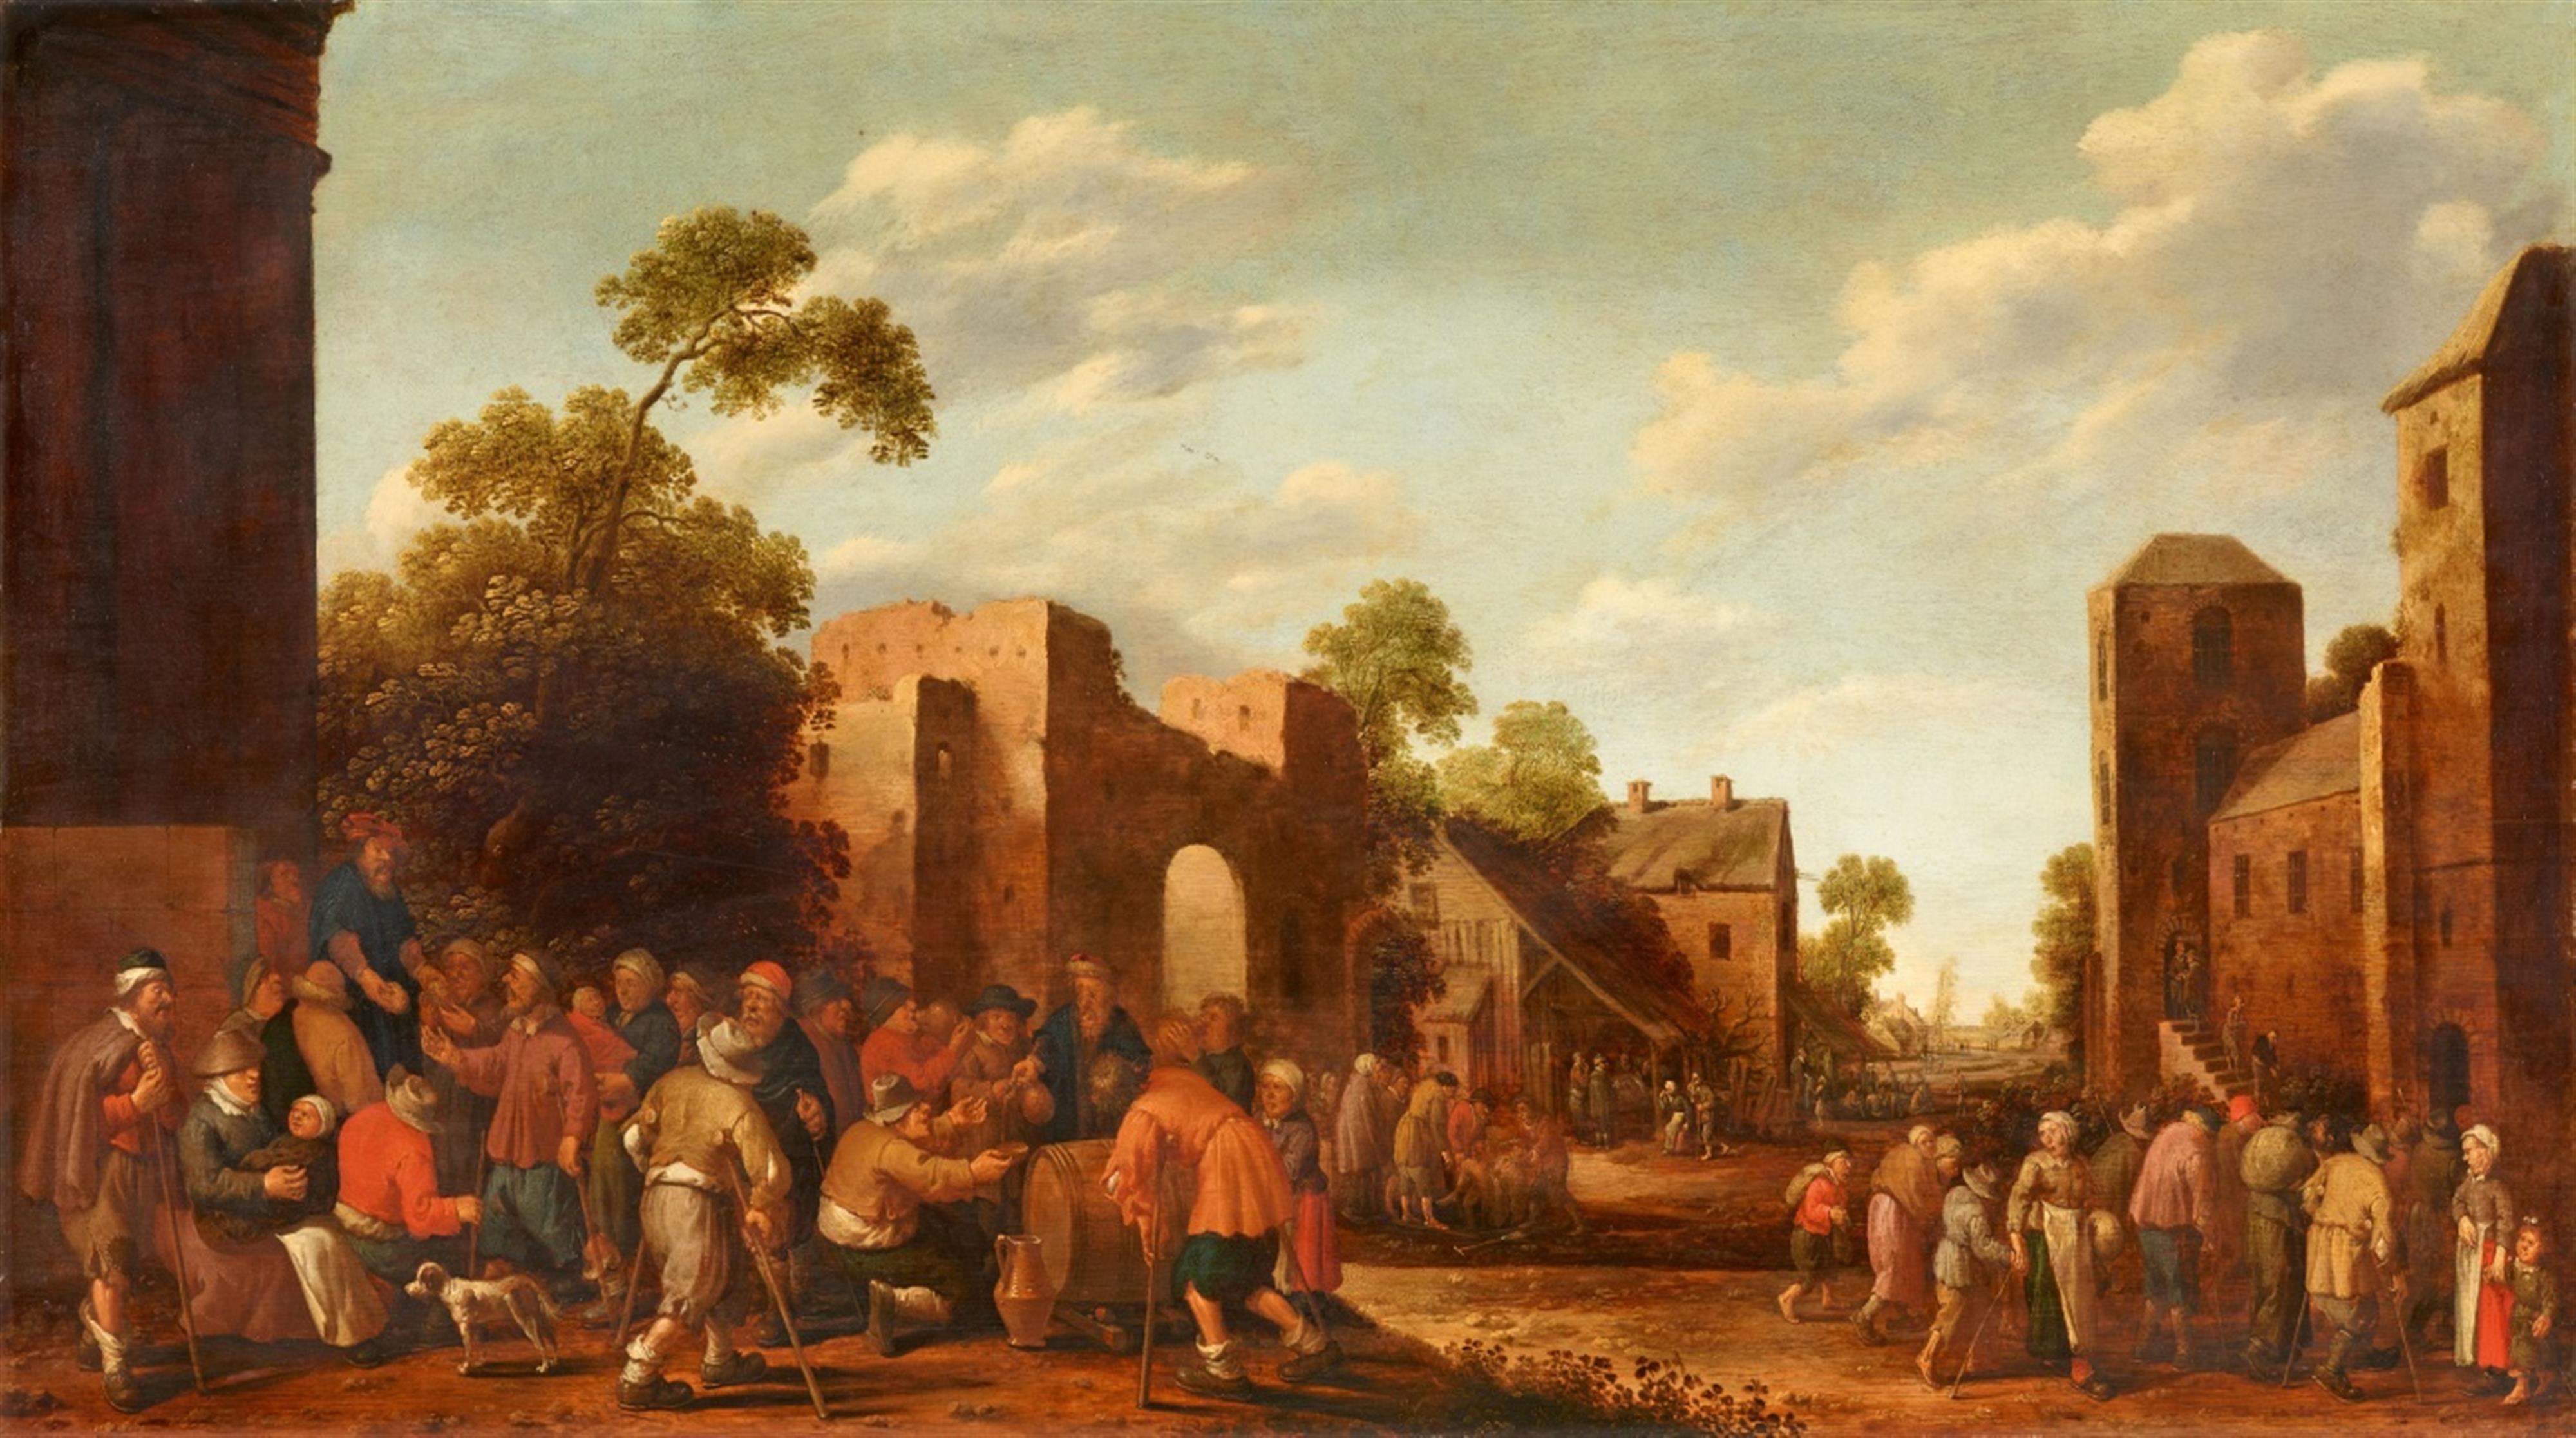 Joost Cornelisz. Droochsloot - Village Scene with the Seven Acts of Mercy - image-1